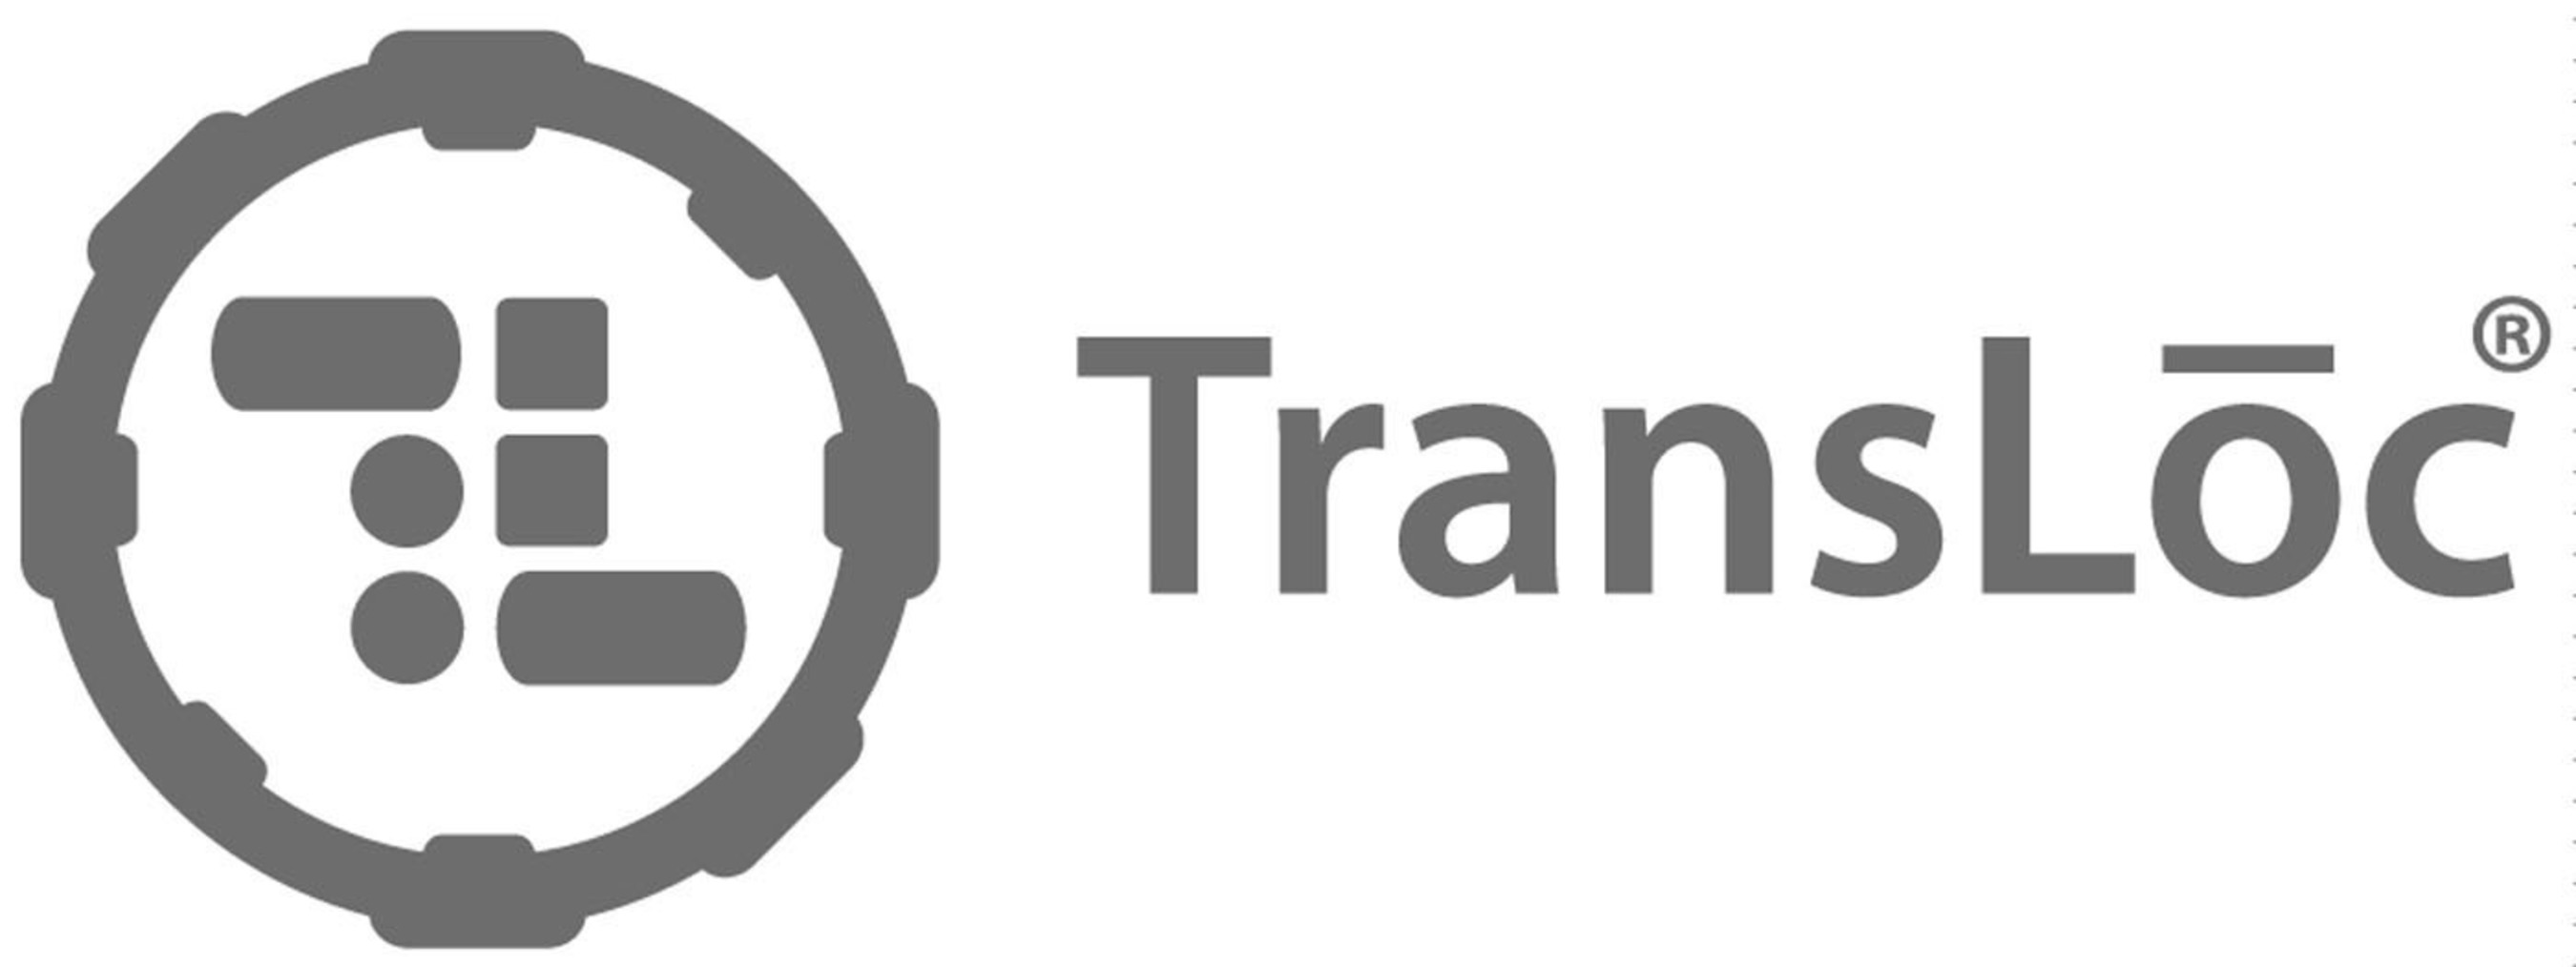 TransLoc provides real time bus tracking that makes riding transit more understandable and reliable. Communicate with your riders in a new way, right to their mobile phone.